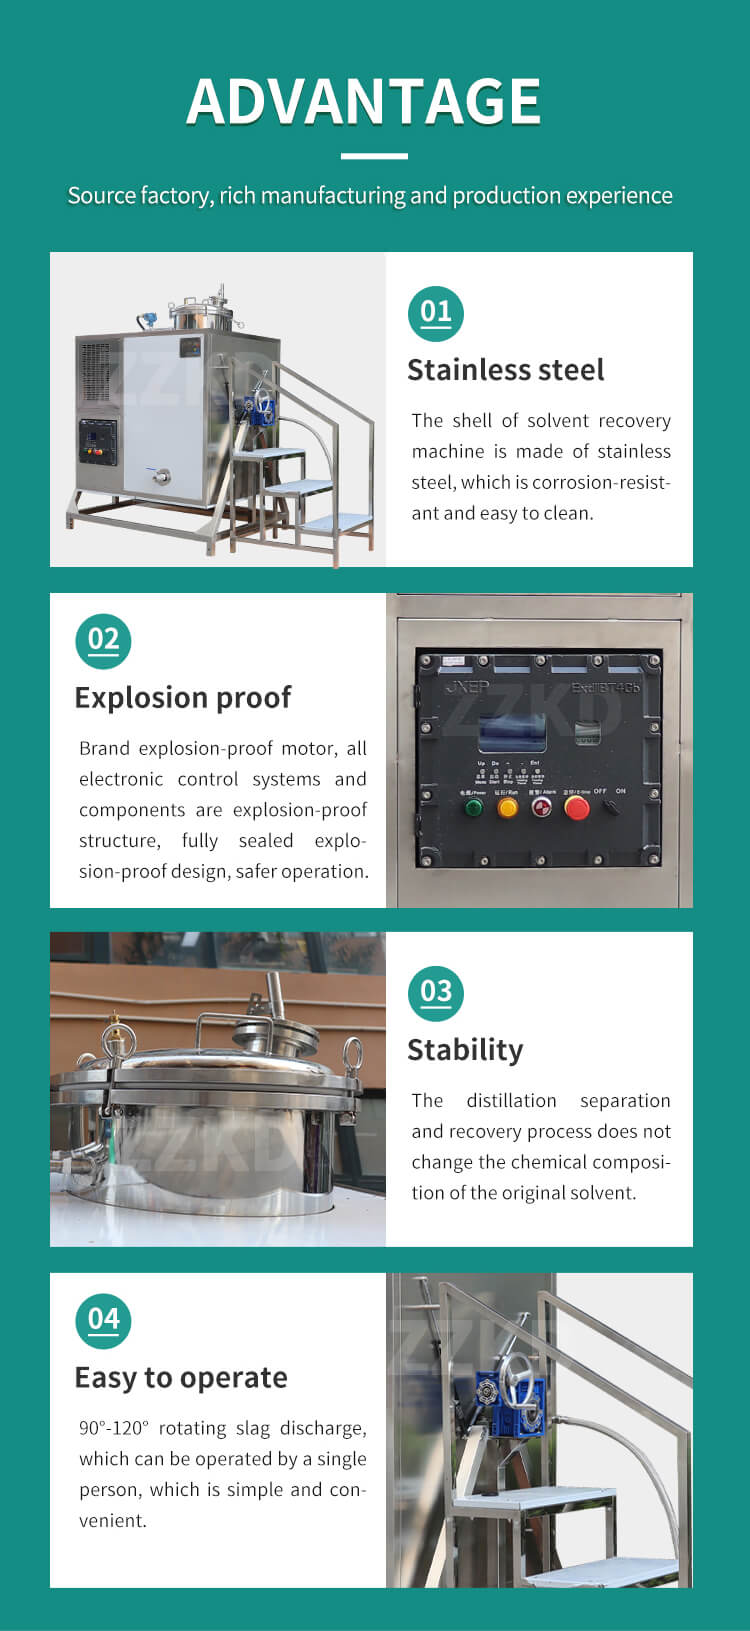 Advantages of Solvent Recovery Machines